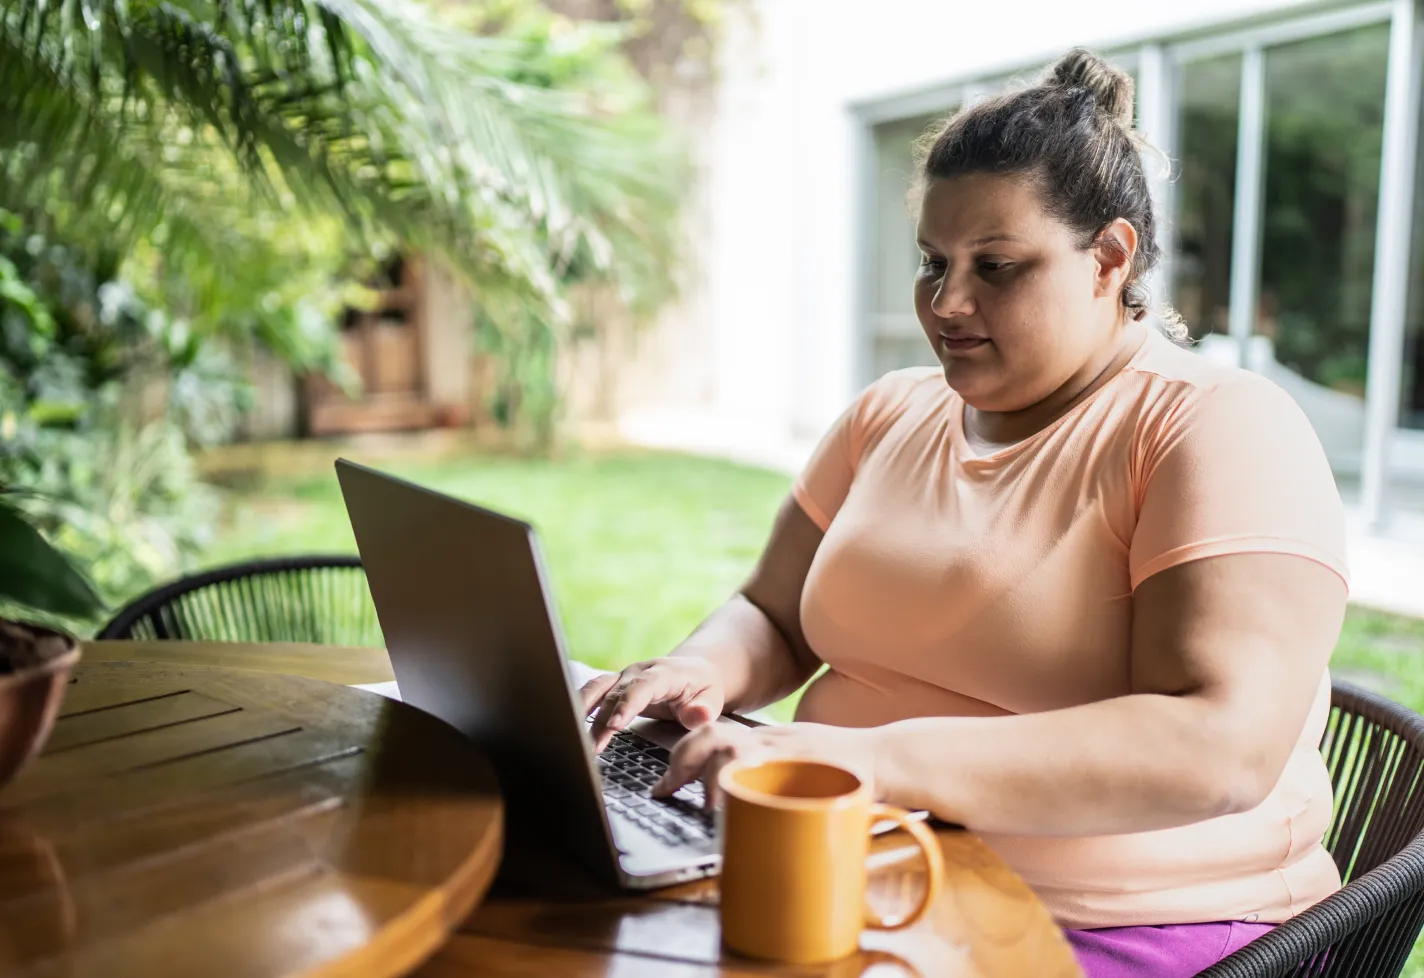 Woman is sitting at a table in her backyard as she types on a laptop. 